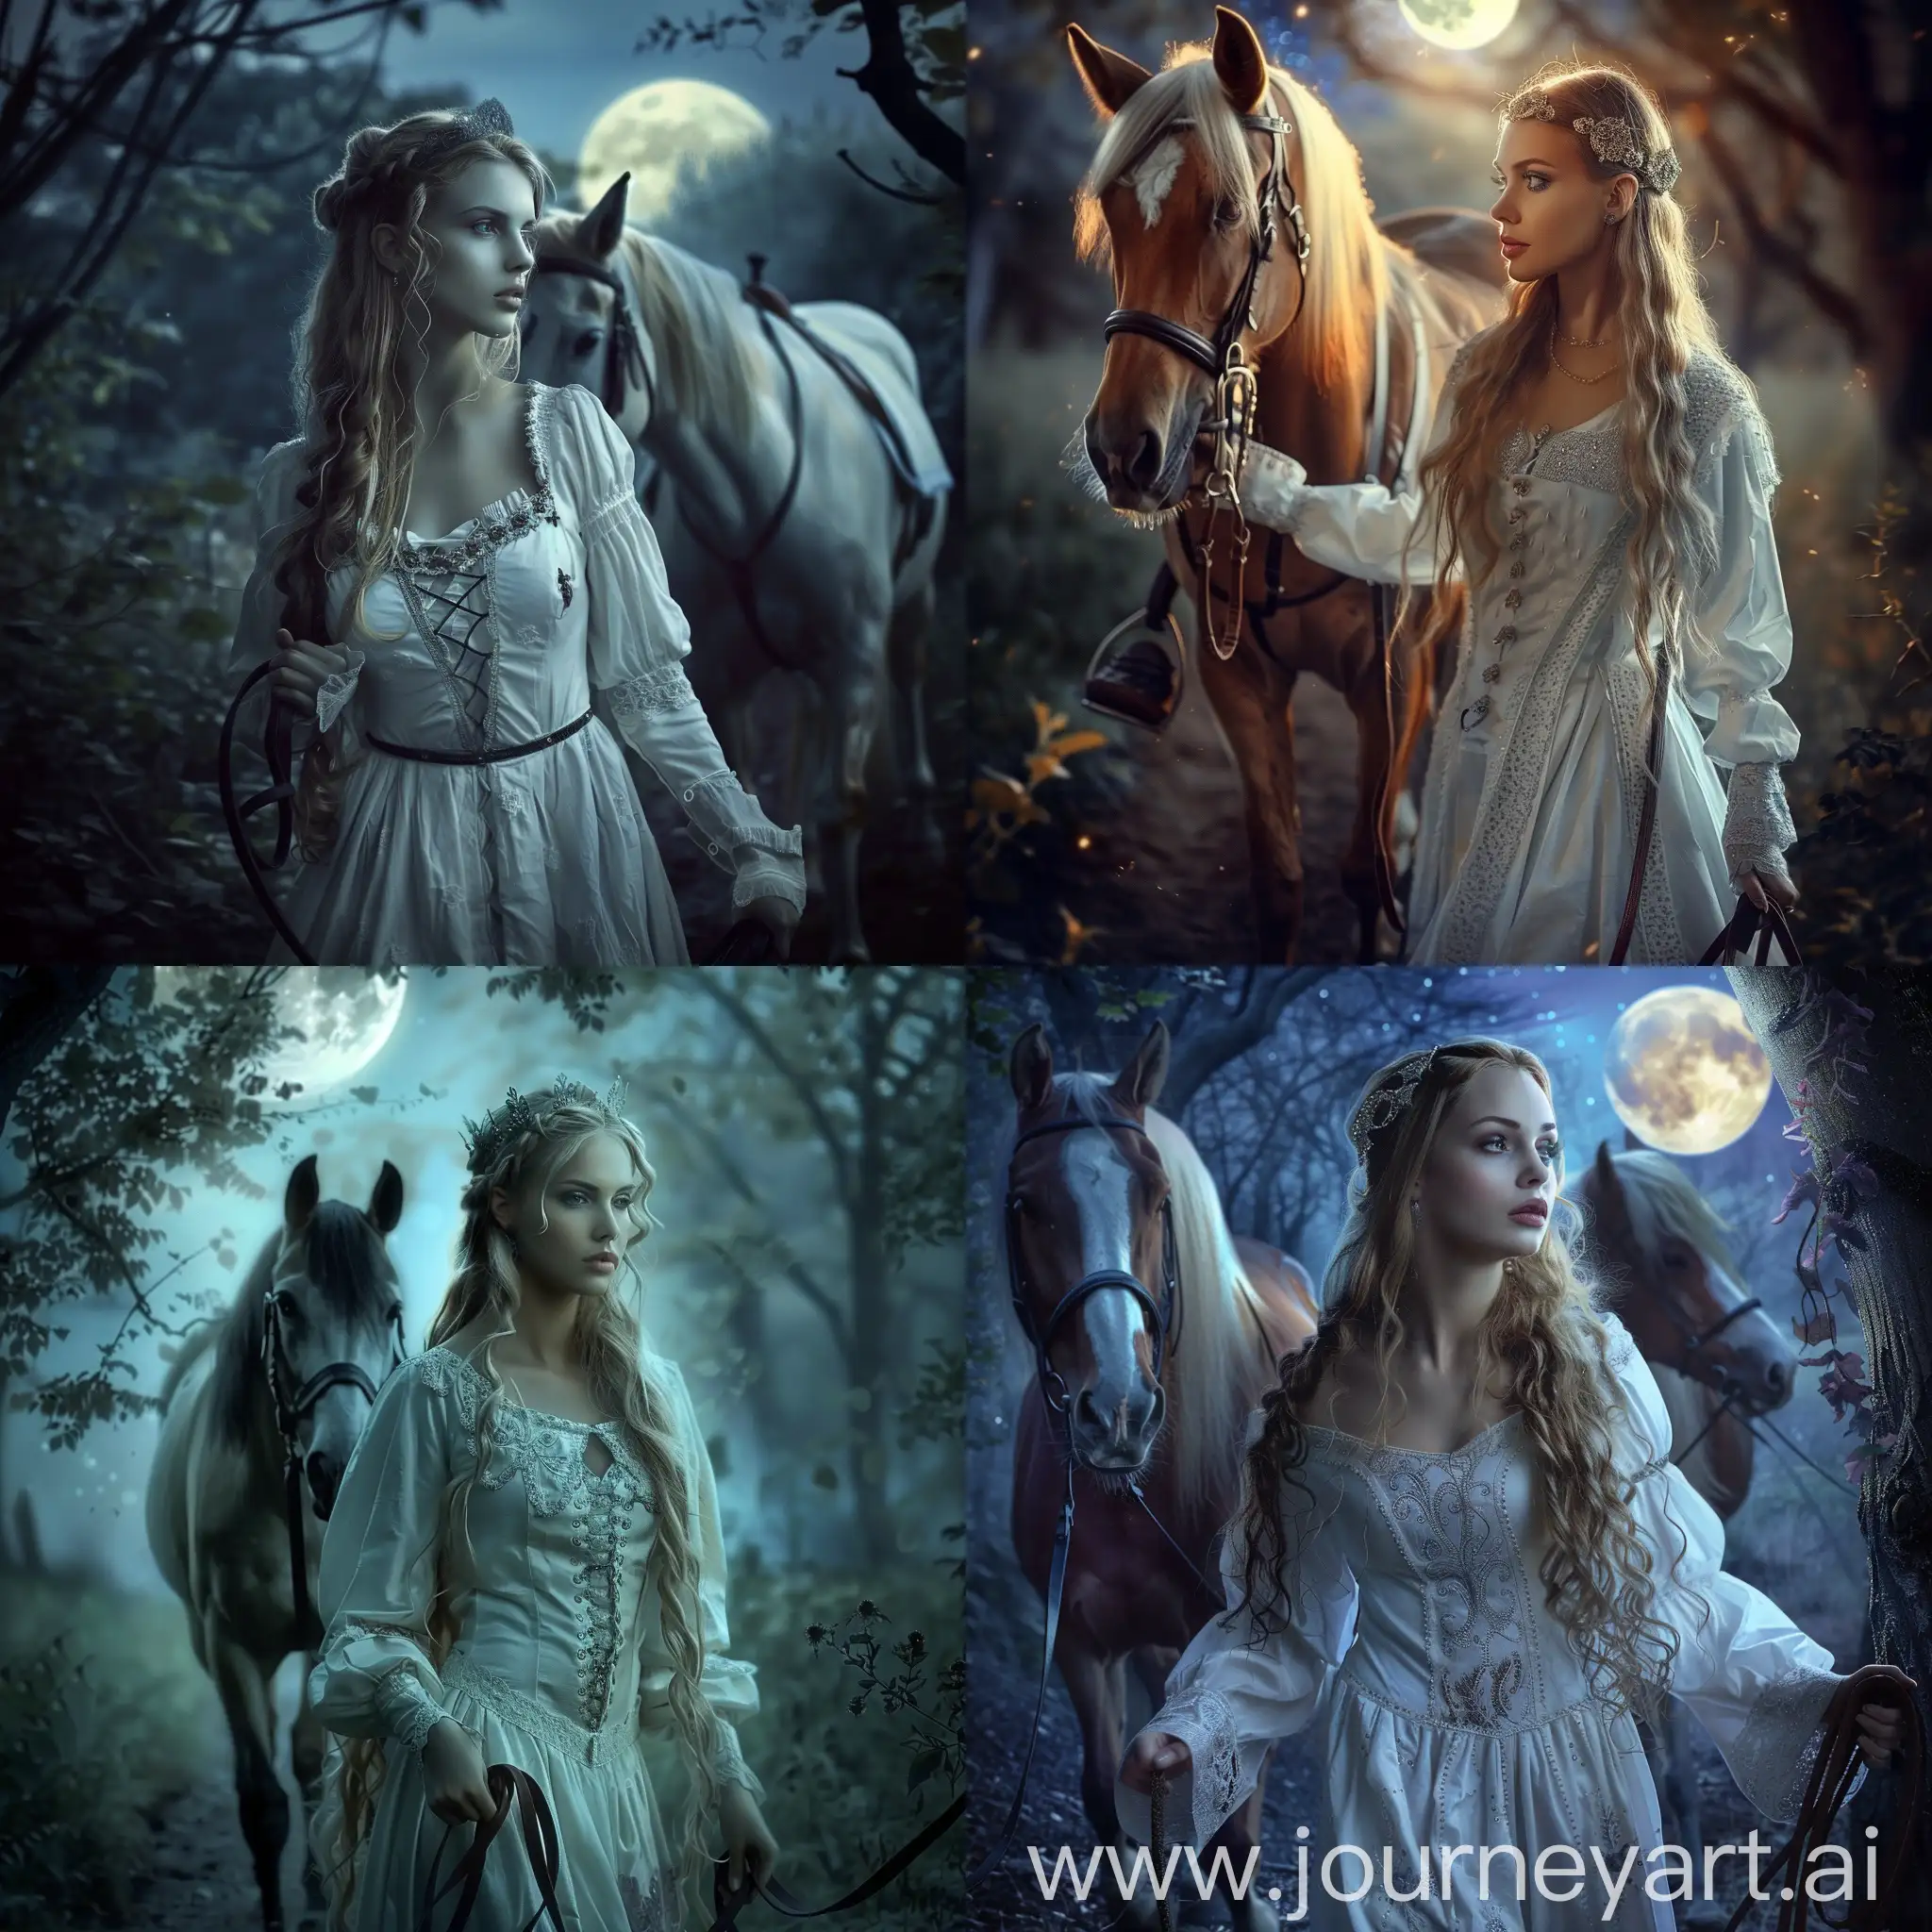 Enchanting-Medieval-Woman-Leading-Horse-in-Moonlit-Forest